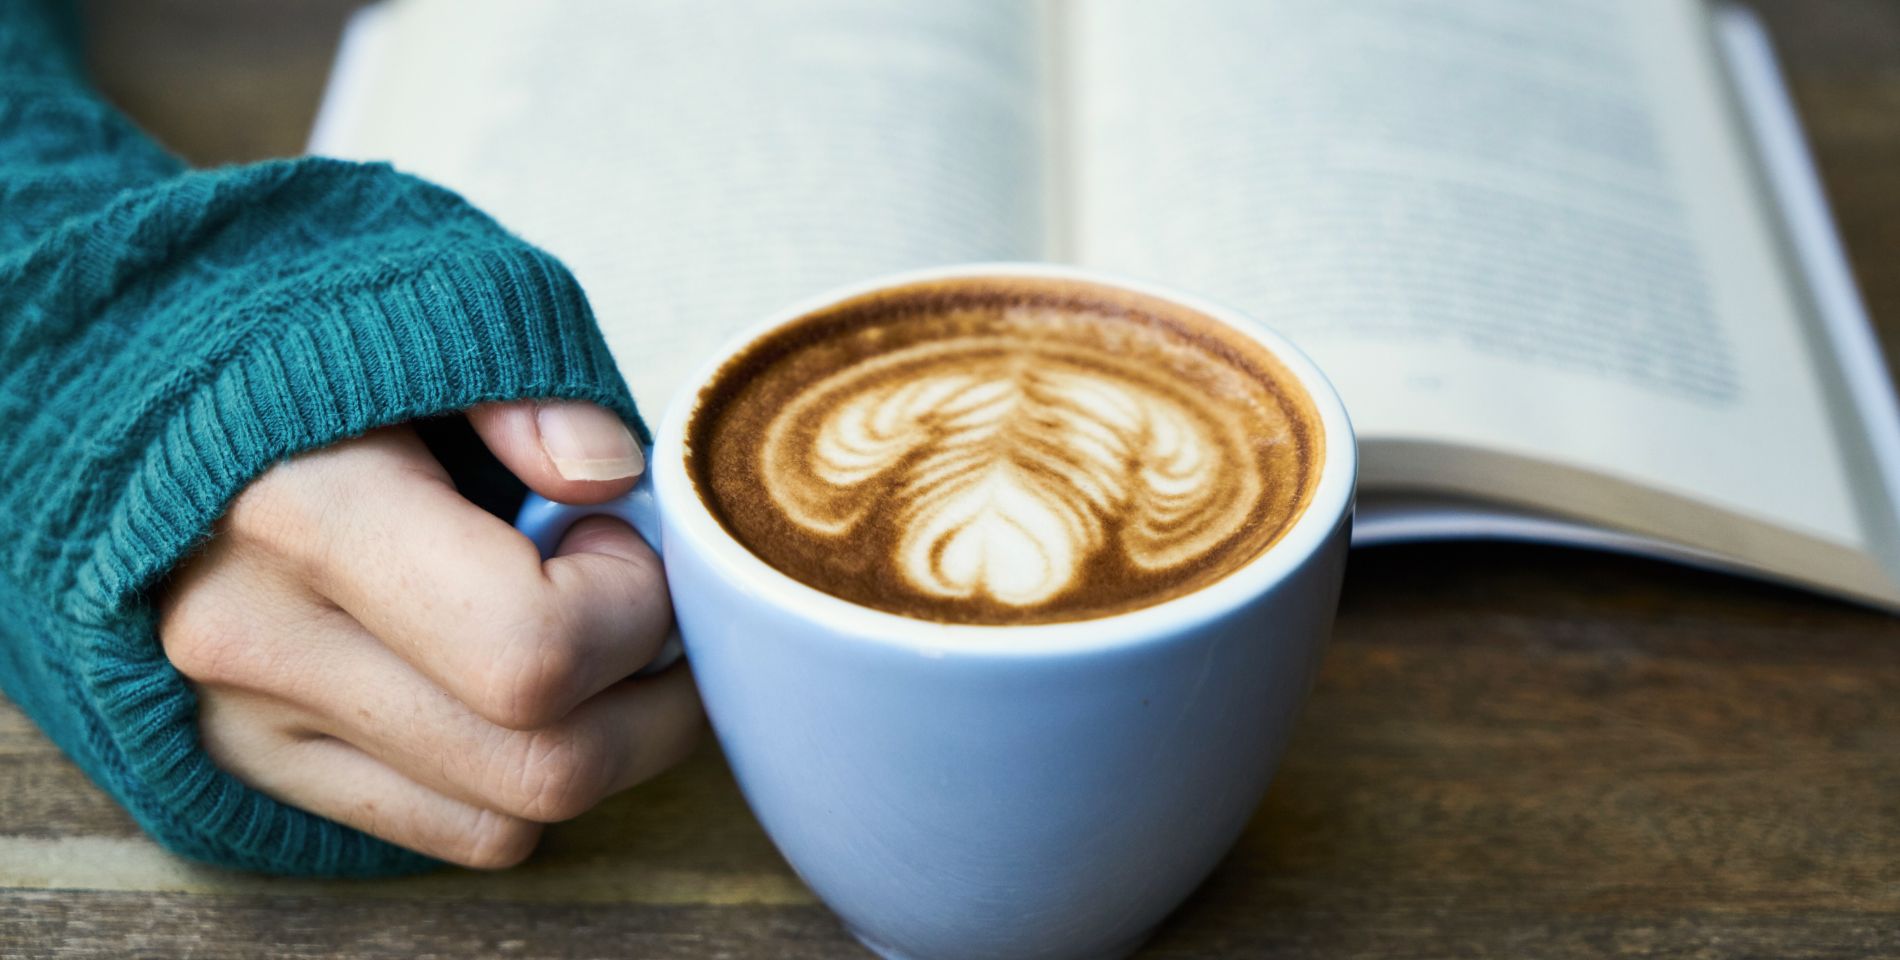 A person reading a book and drinking a latte at a coffee house